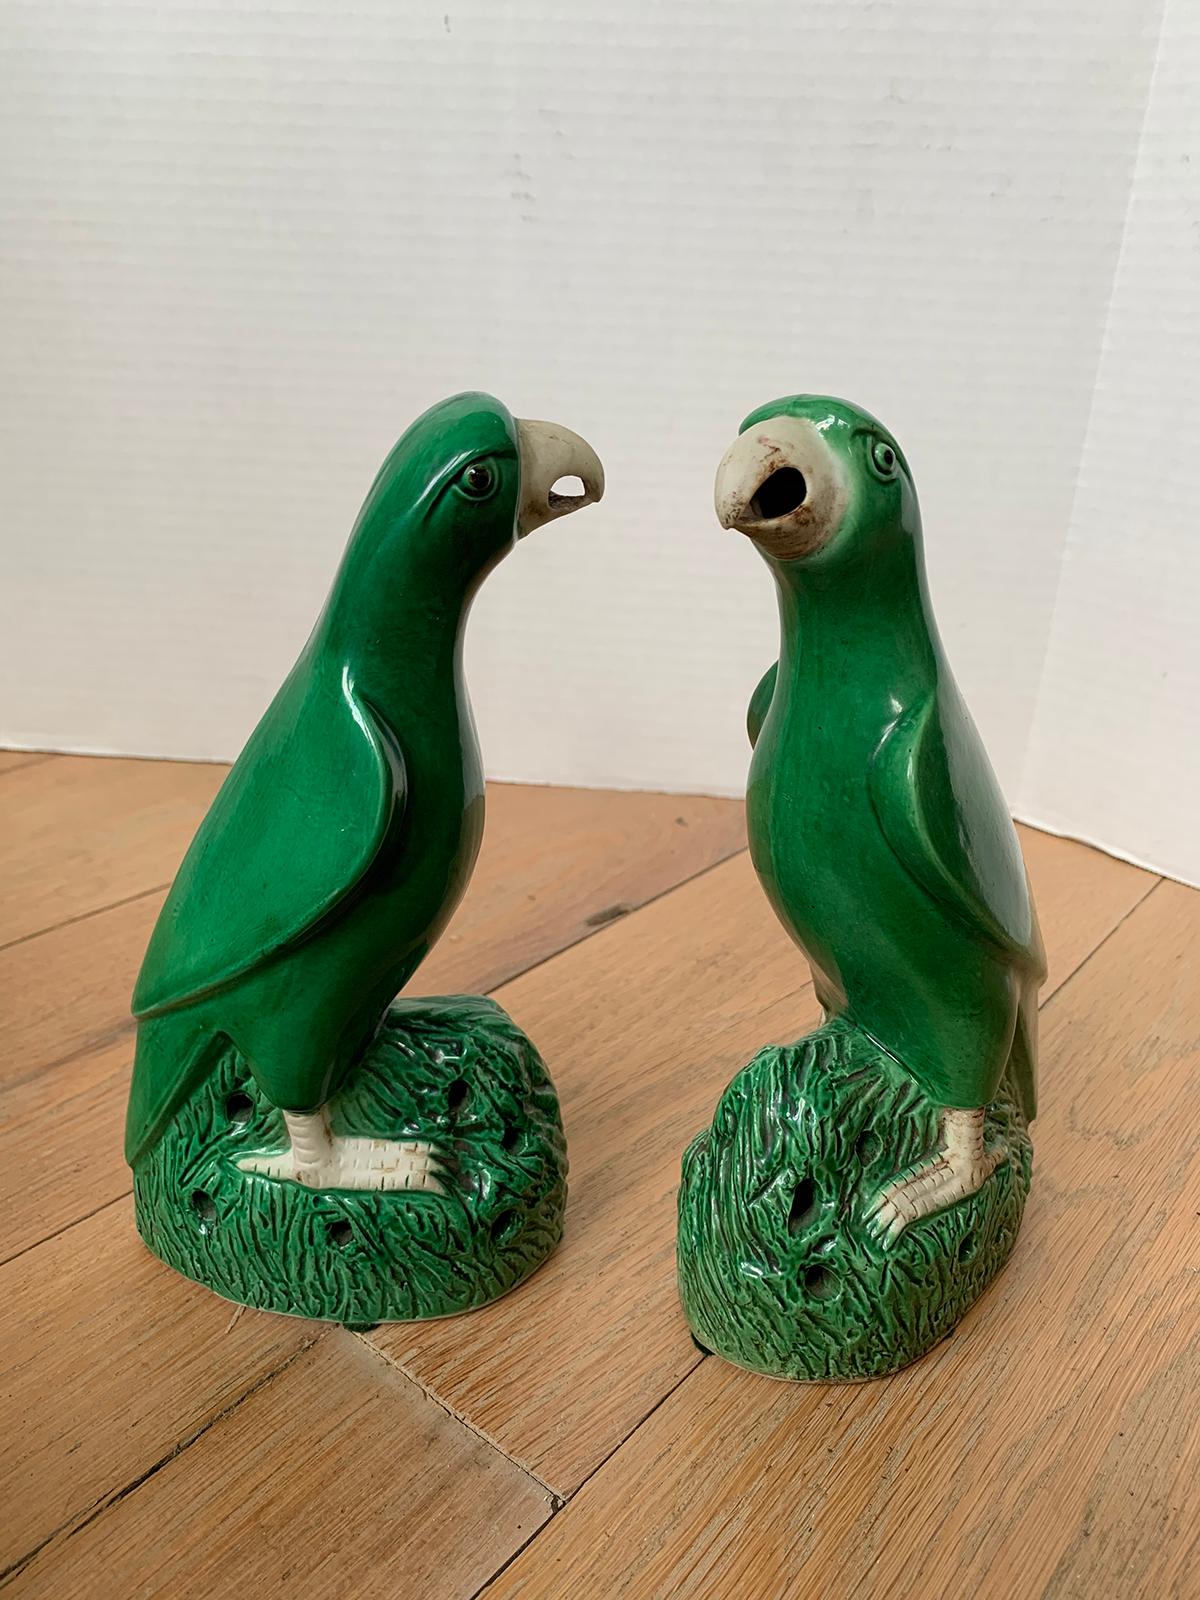 Pair of 19th century Chinese Export green glazed porcelain parrots, unmarked.